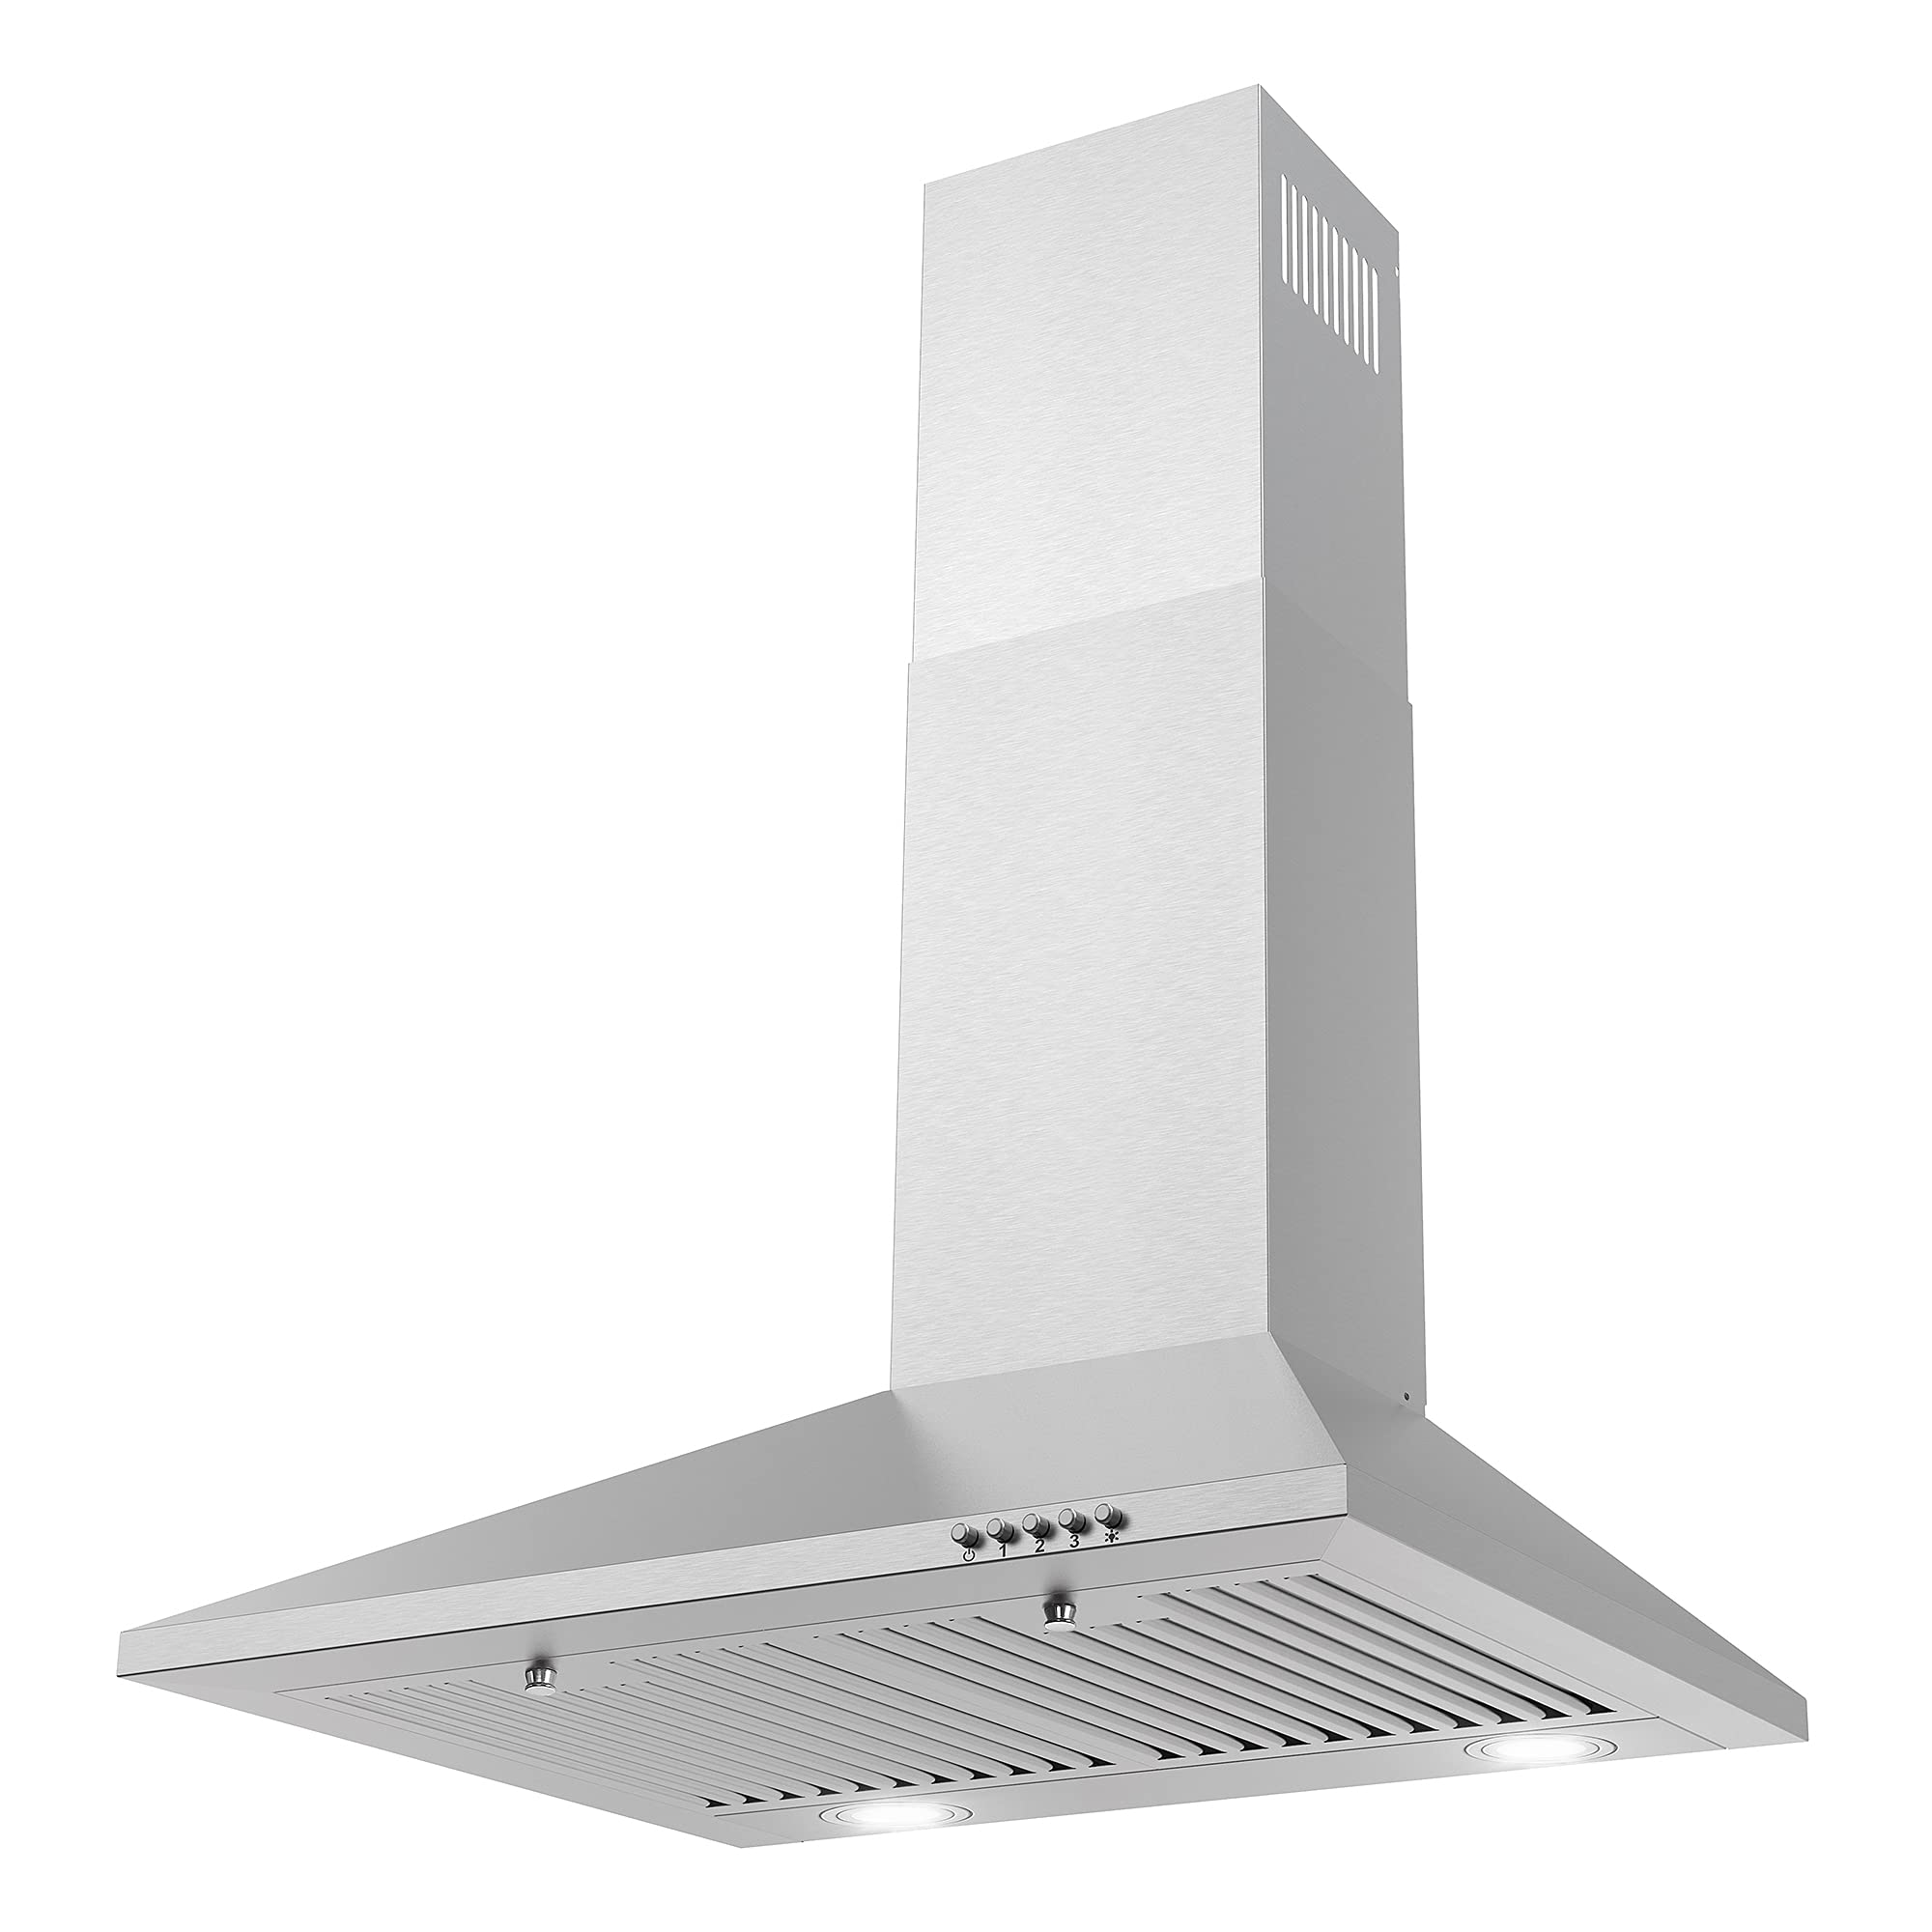 COSMO COS-6324EWH Wall Mount Range Hood, Chimney-Style Over Stove Vent, 3 Speed Fan, Permanent Filters, LED Lights in Stainless Steel (24 inch)